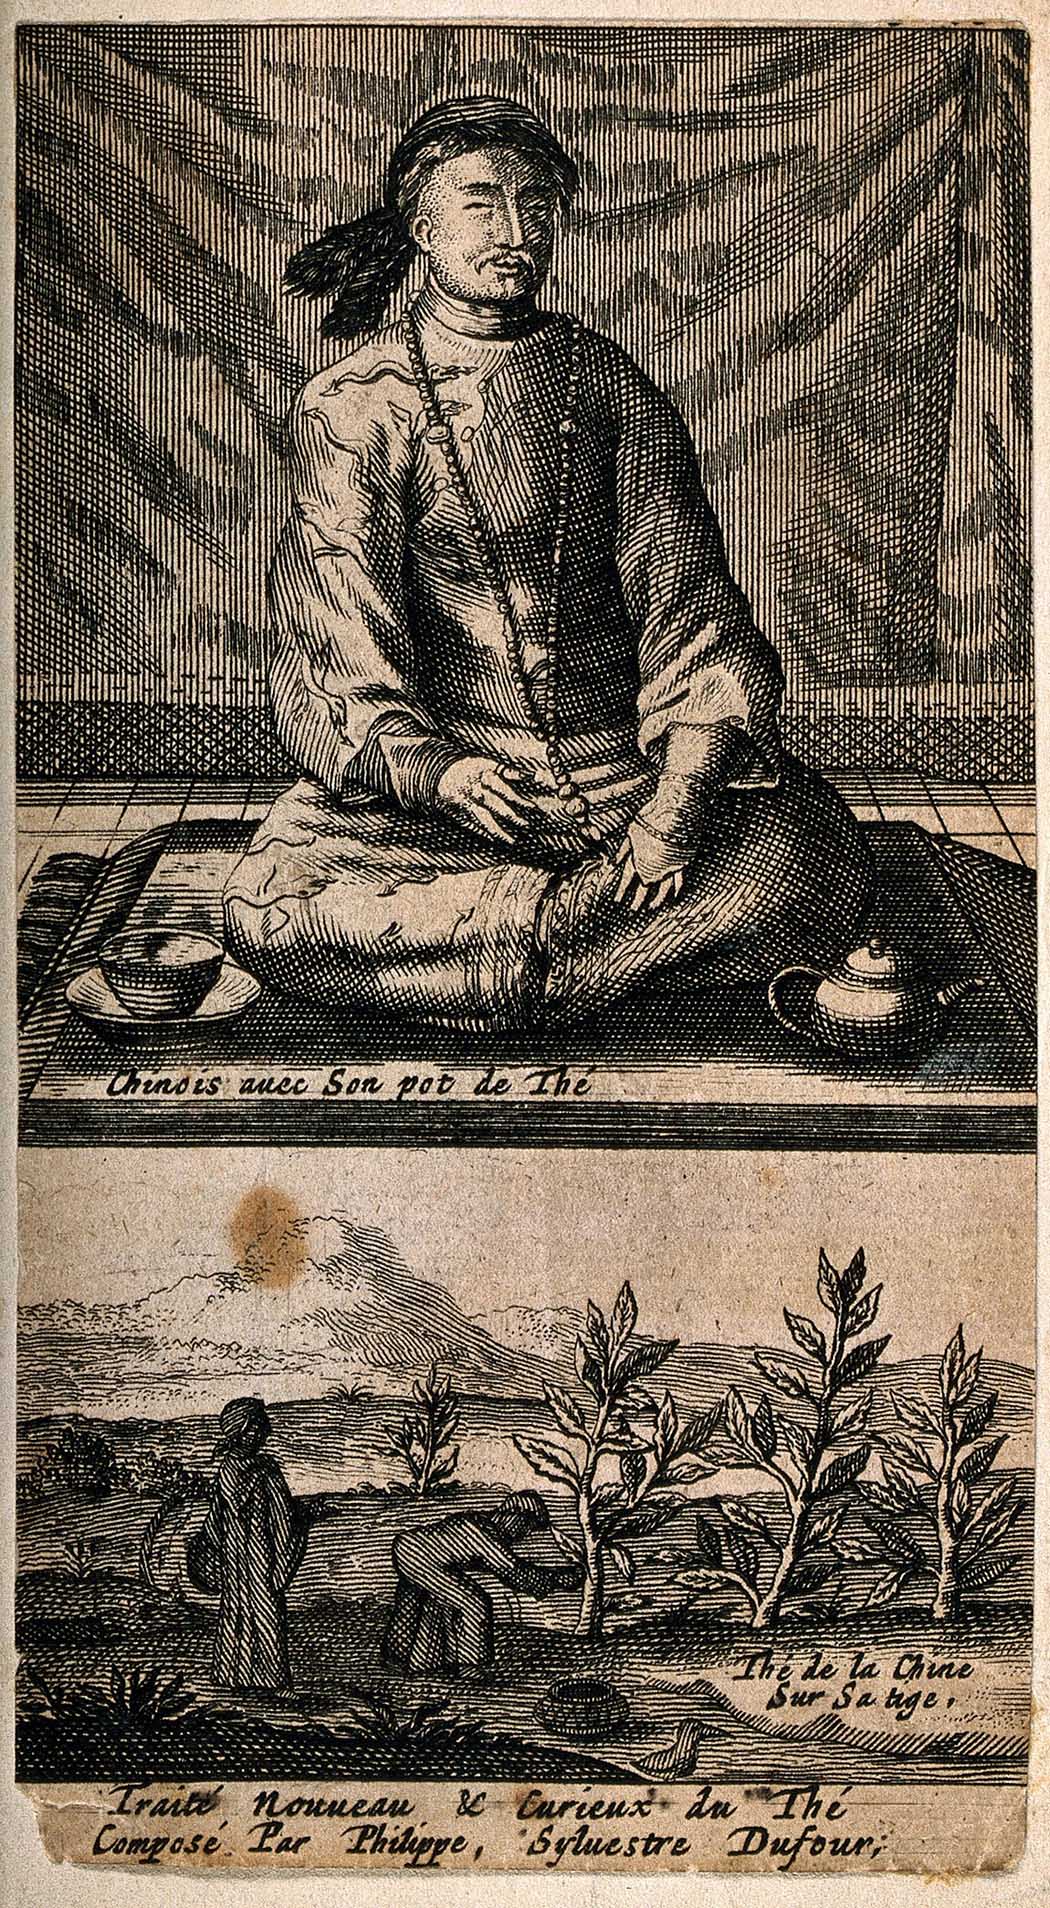 A c. 1693 etching by Philippe Sylvestre Dufour of a Chinese man with his tea pot, and workers harvesting tea